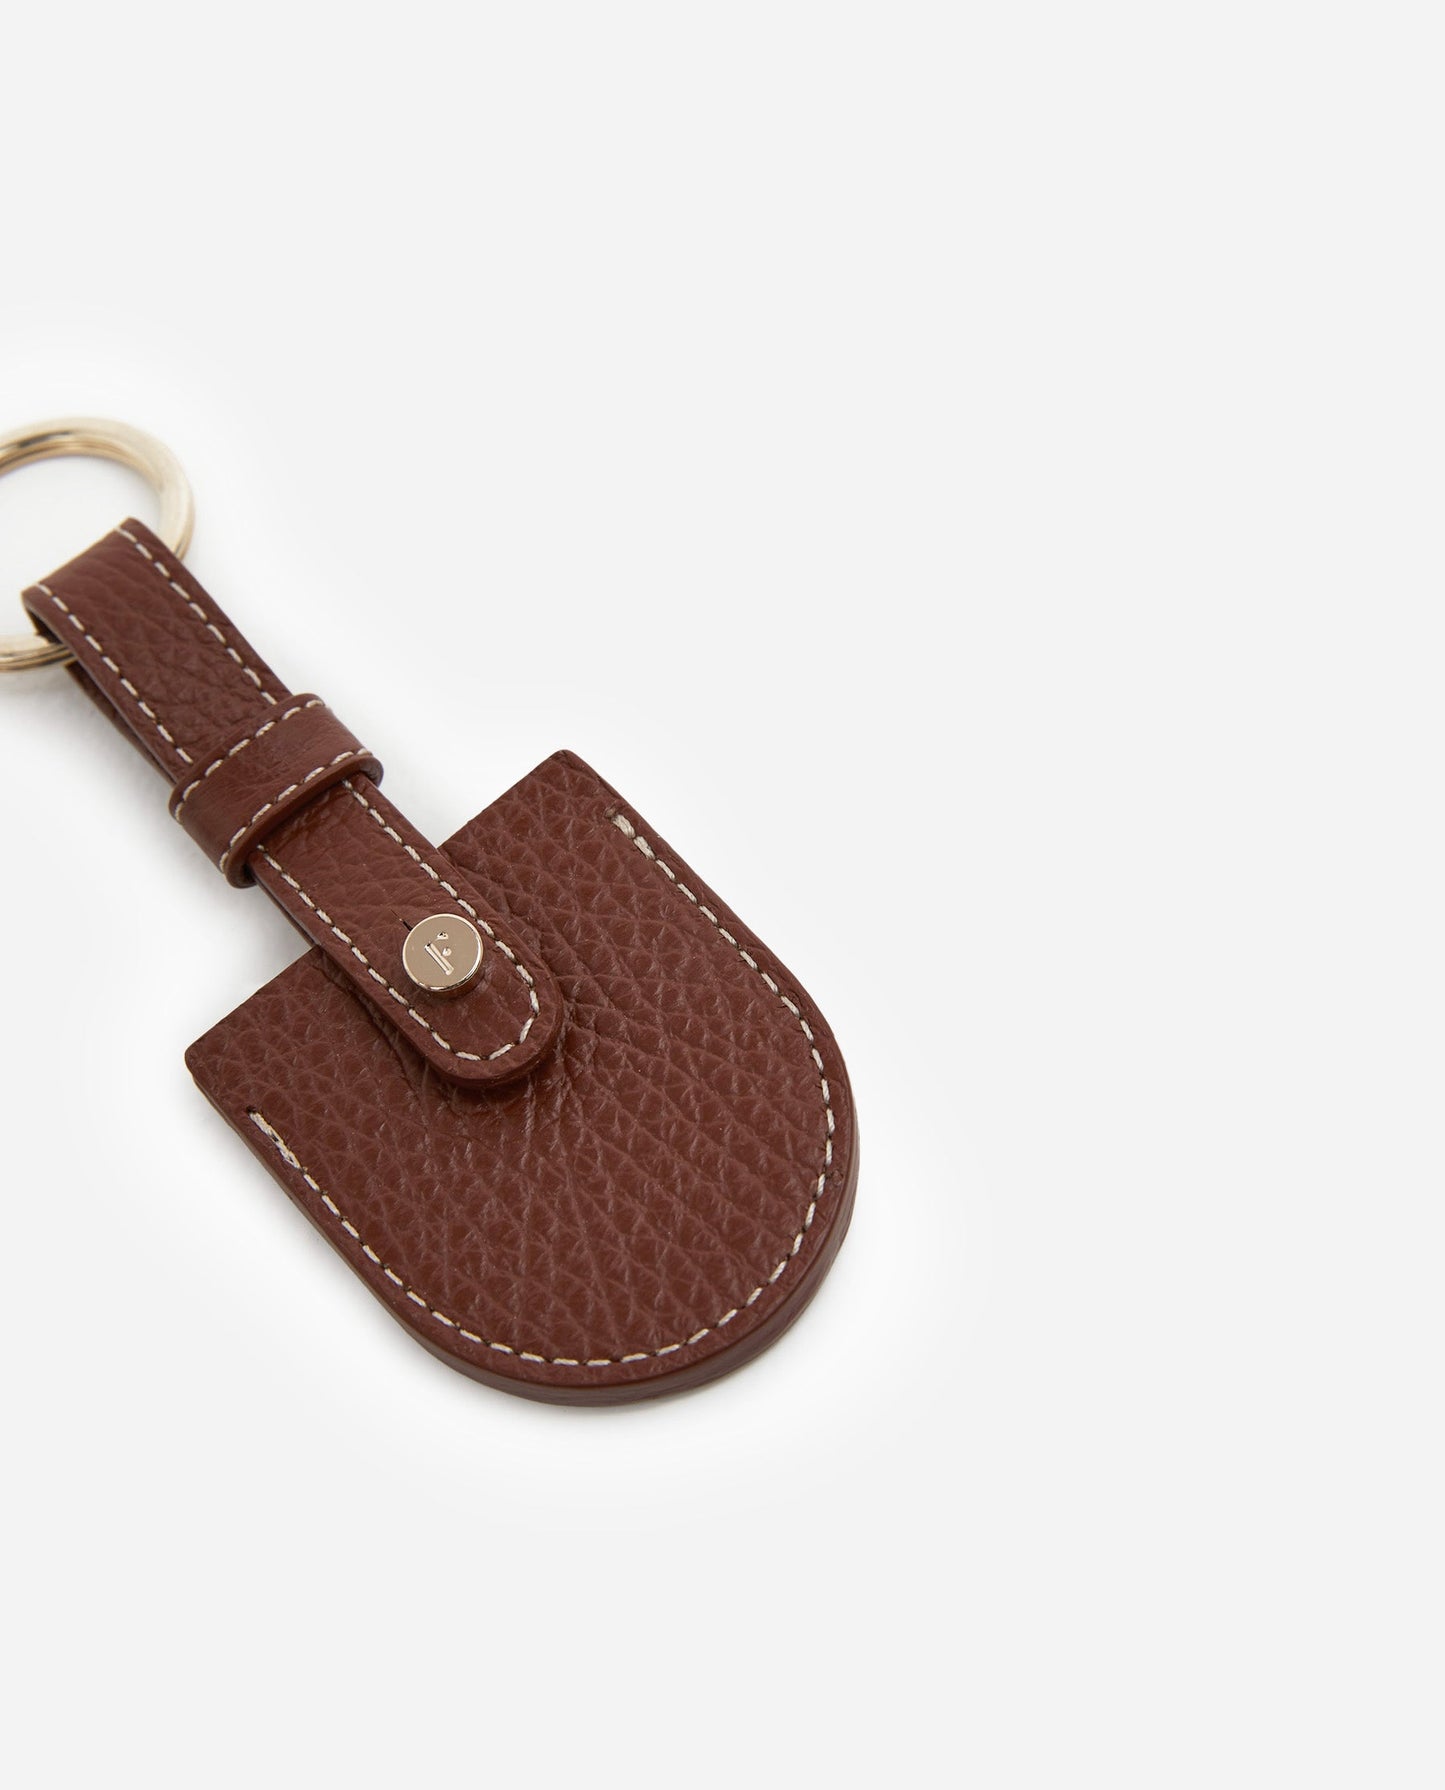 Airy Keyring Leather Cognac